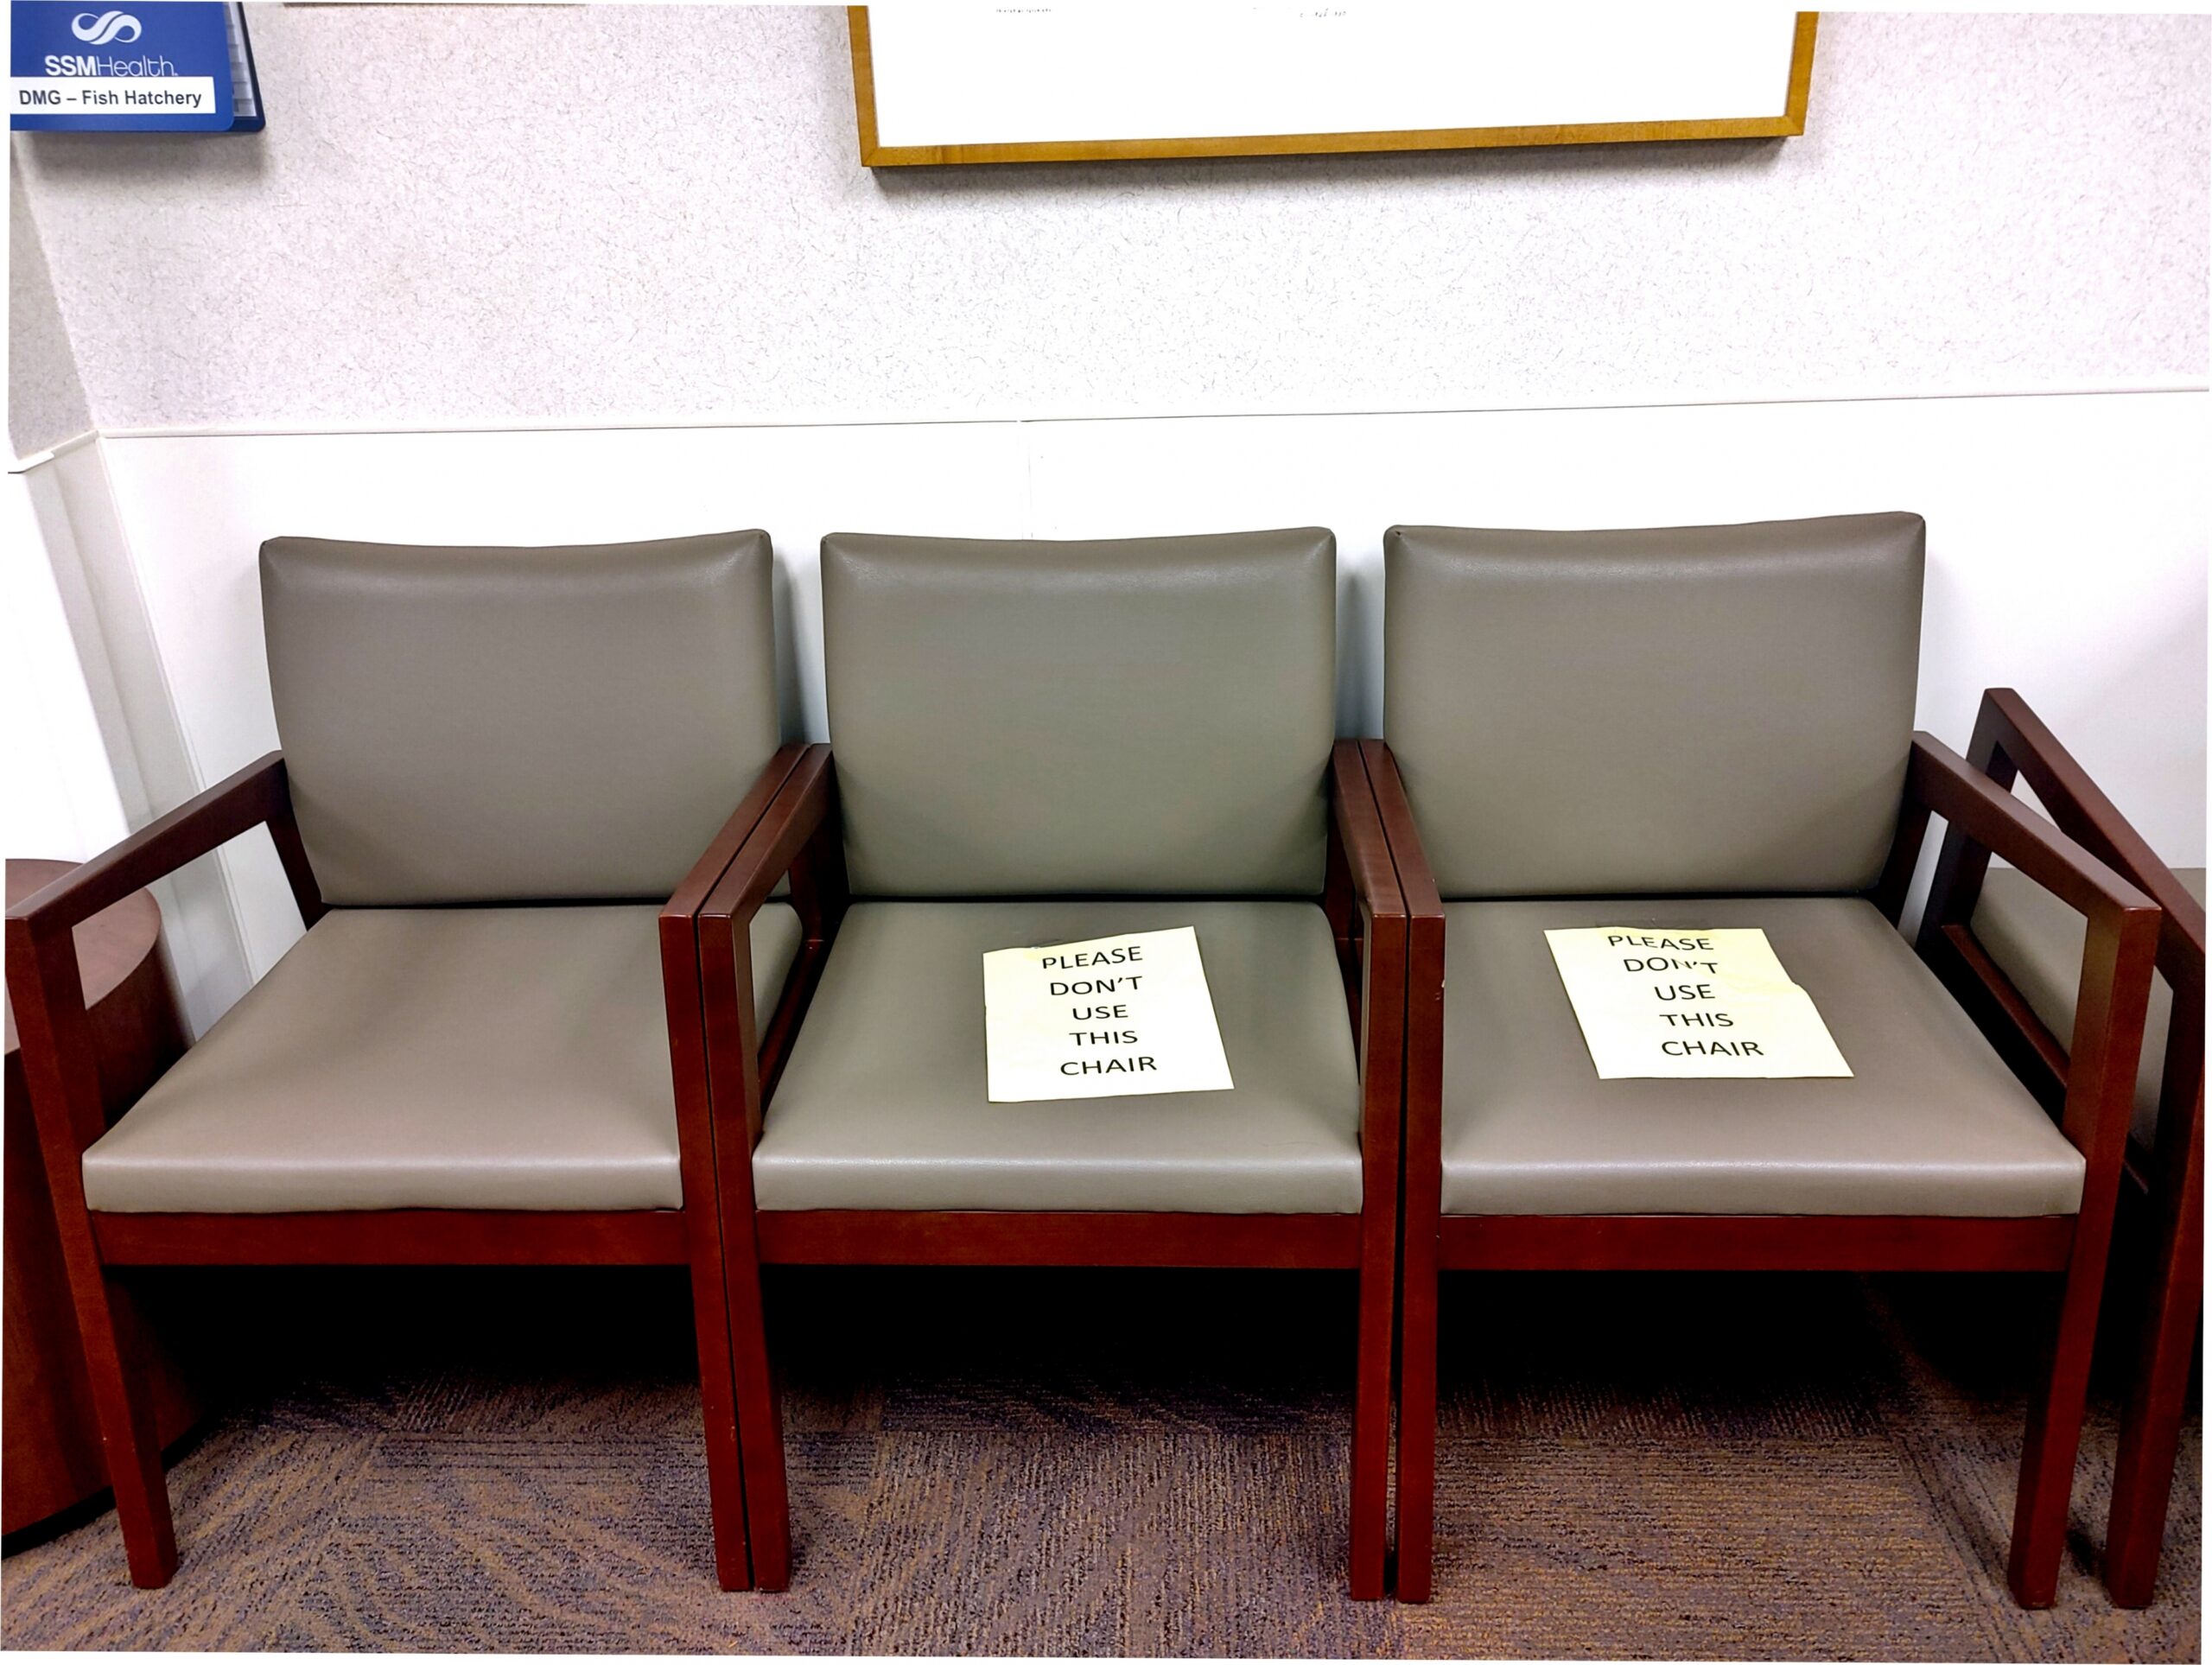 Signs on chairs warning patients to maintain social distancing at one SSM Health clinic on the south side of Madison